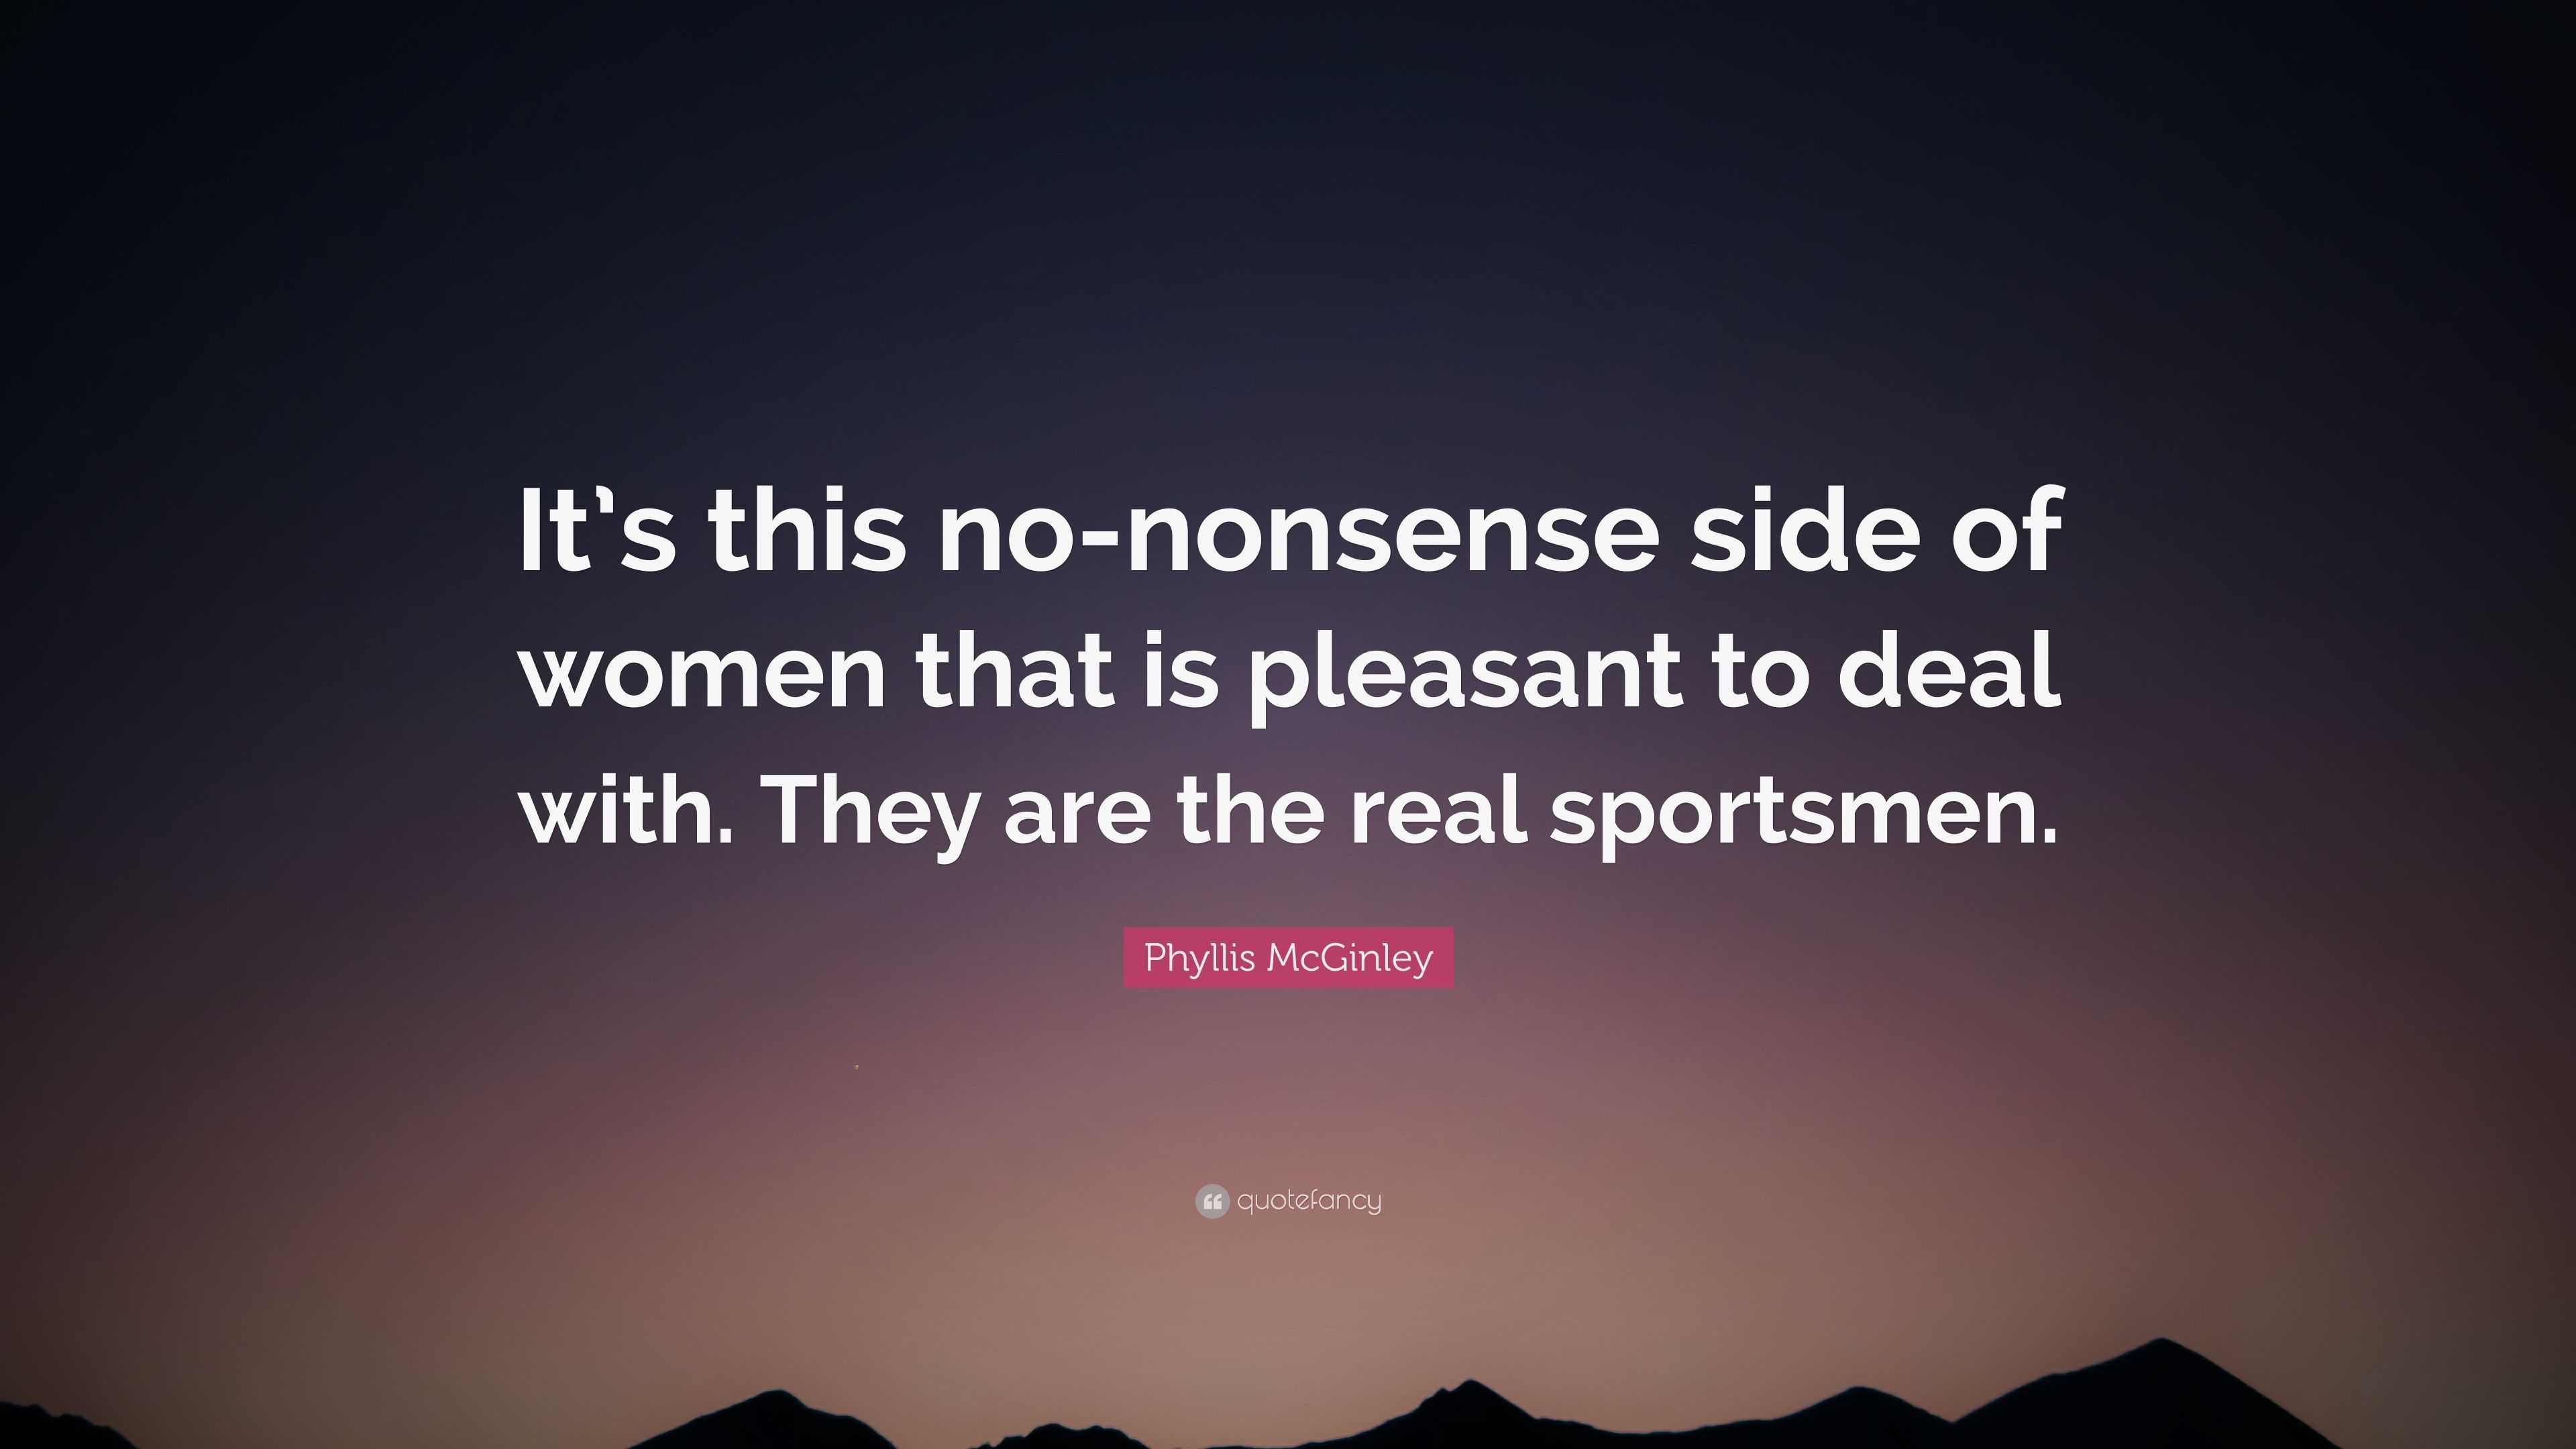 Phyllis McGinley Quote: “It's this no-nonsense side of women that